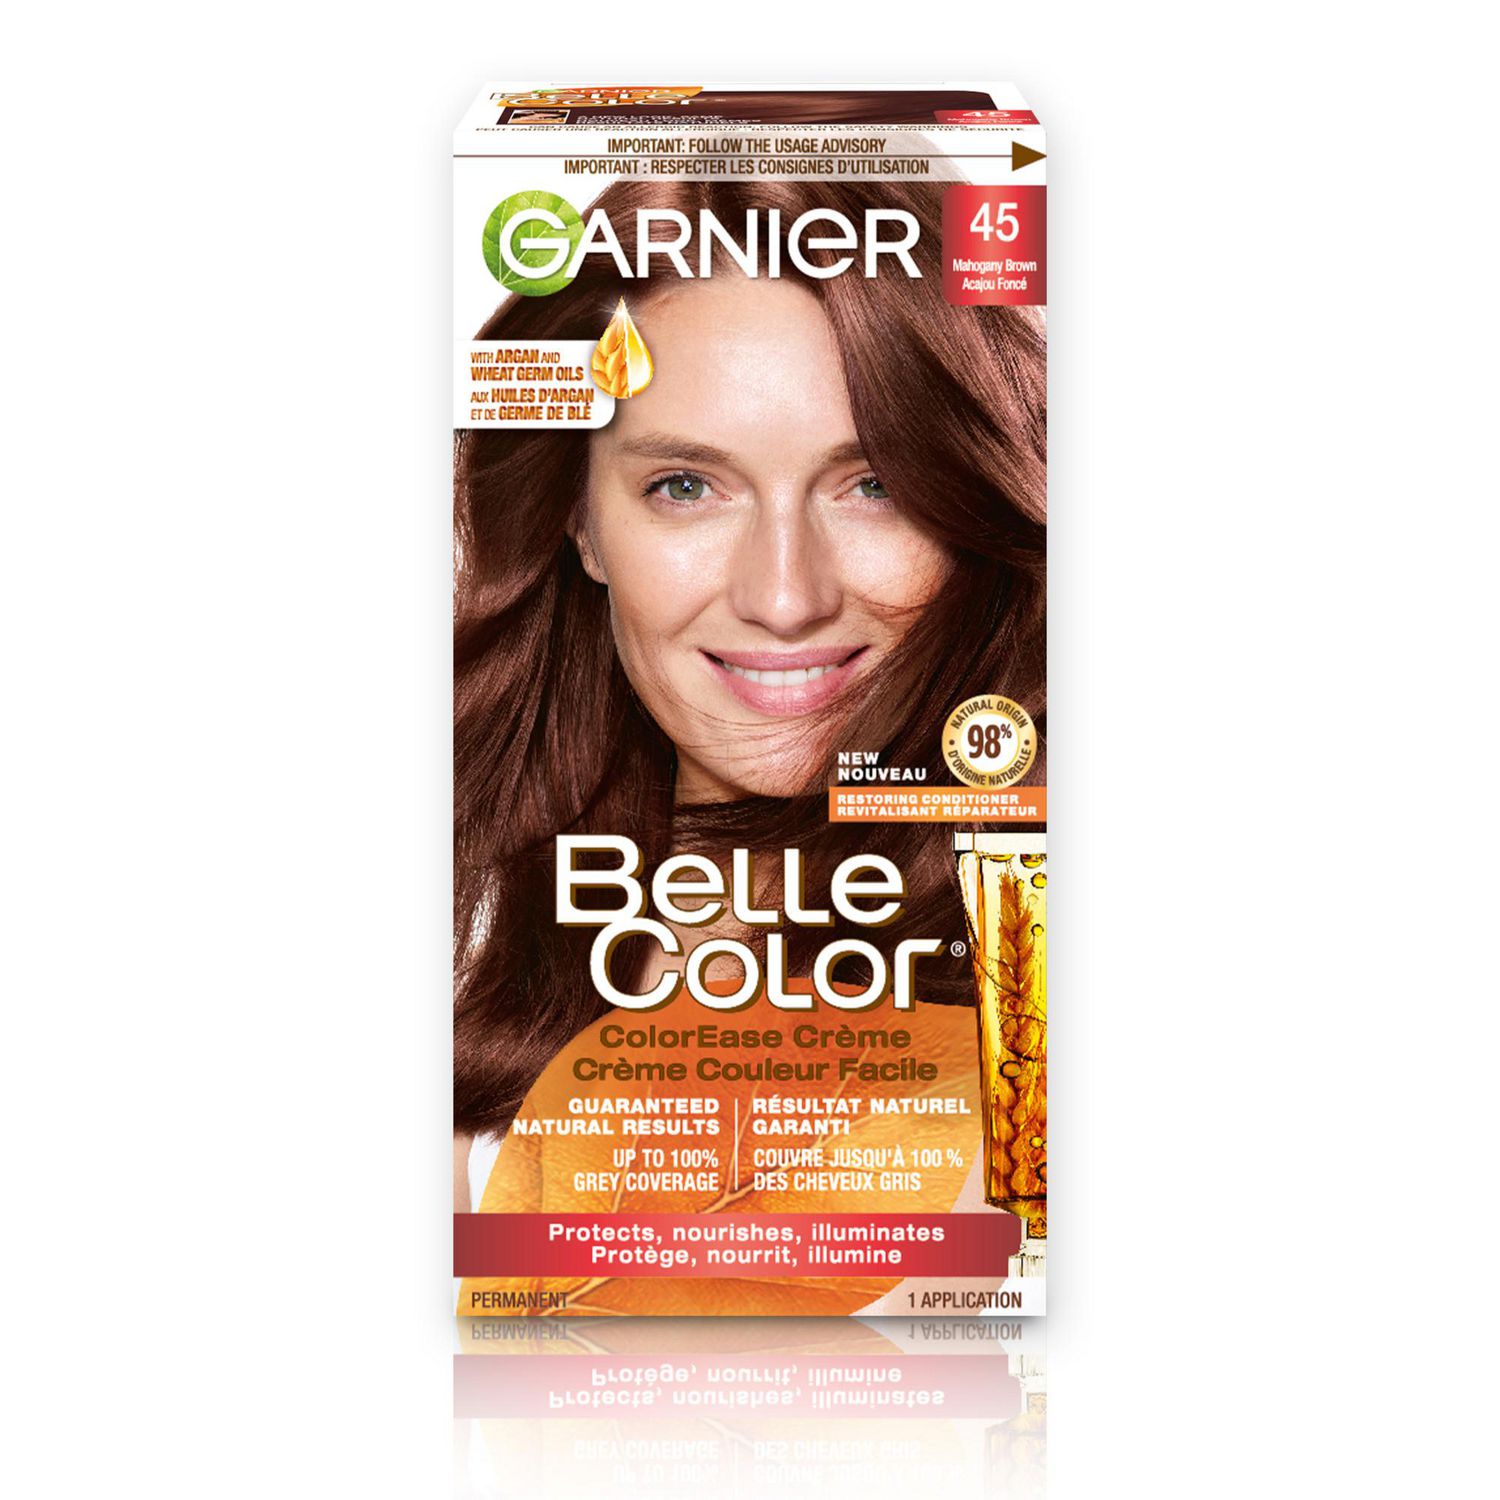 Garnier Belle Color Permanent Hair Dye, 560 Red Auburn, 100% Grey Coverage,  Enriched with Argan Oil and Wheat Germ Oils - 1 Application | Walmart Canada